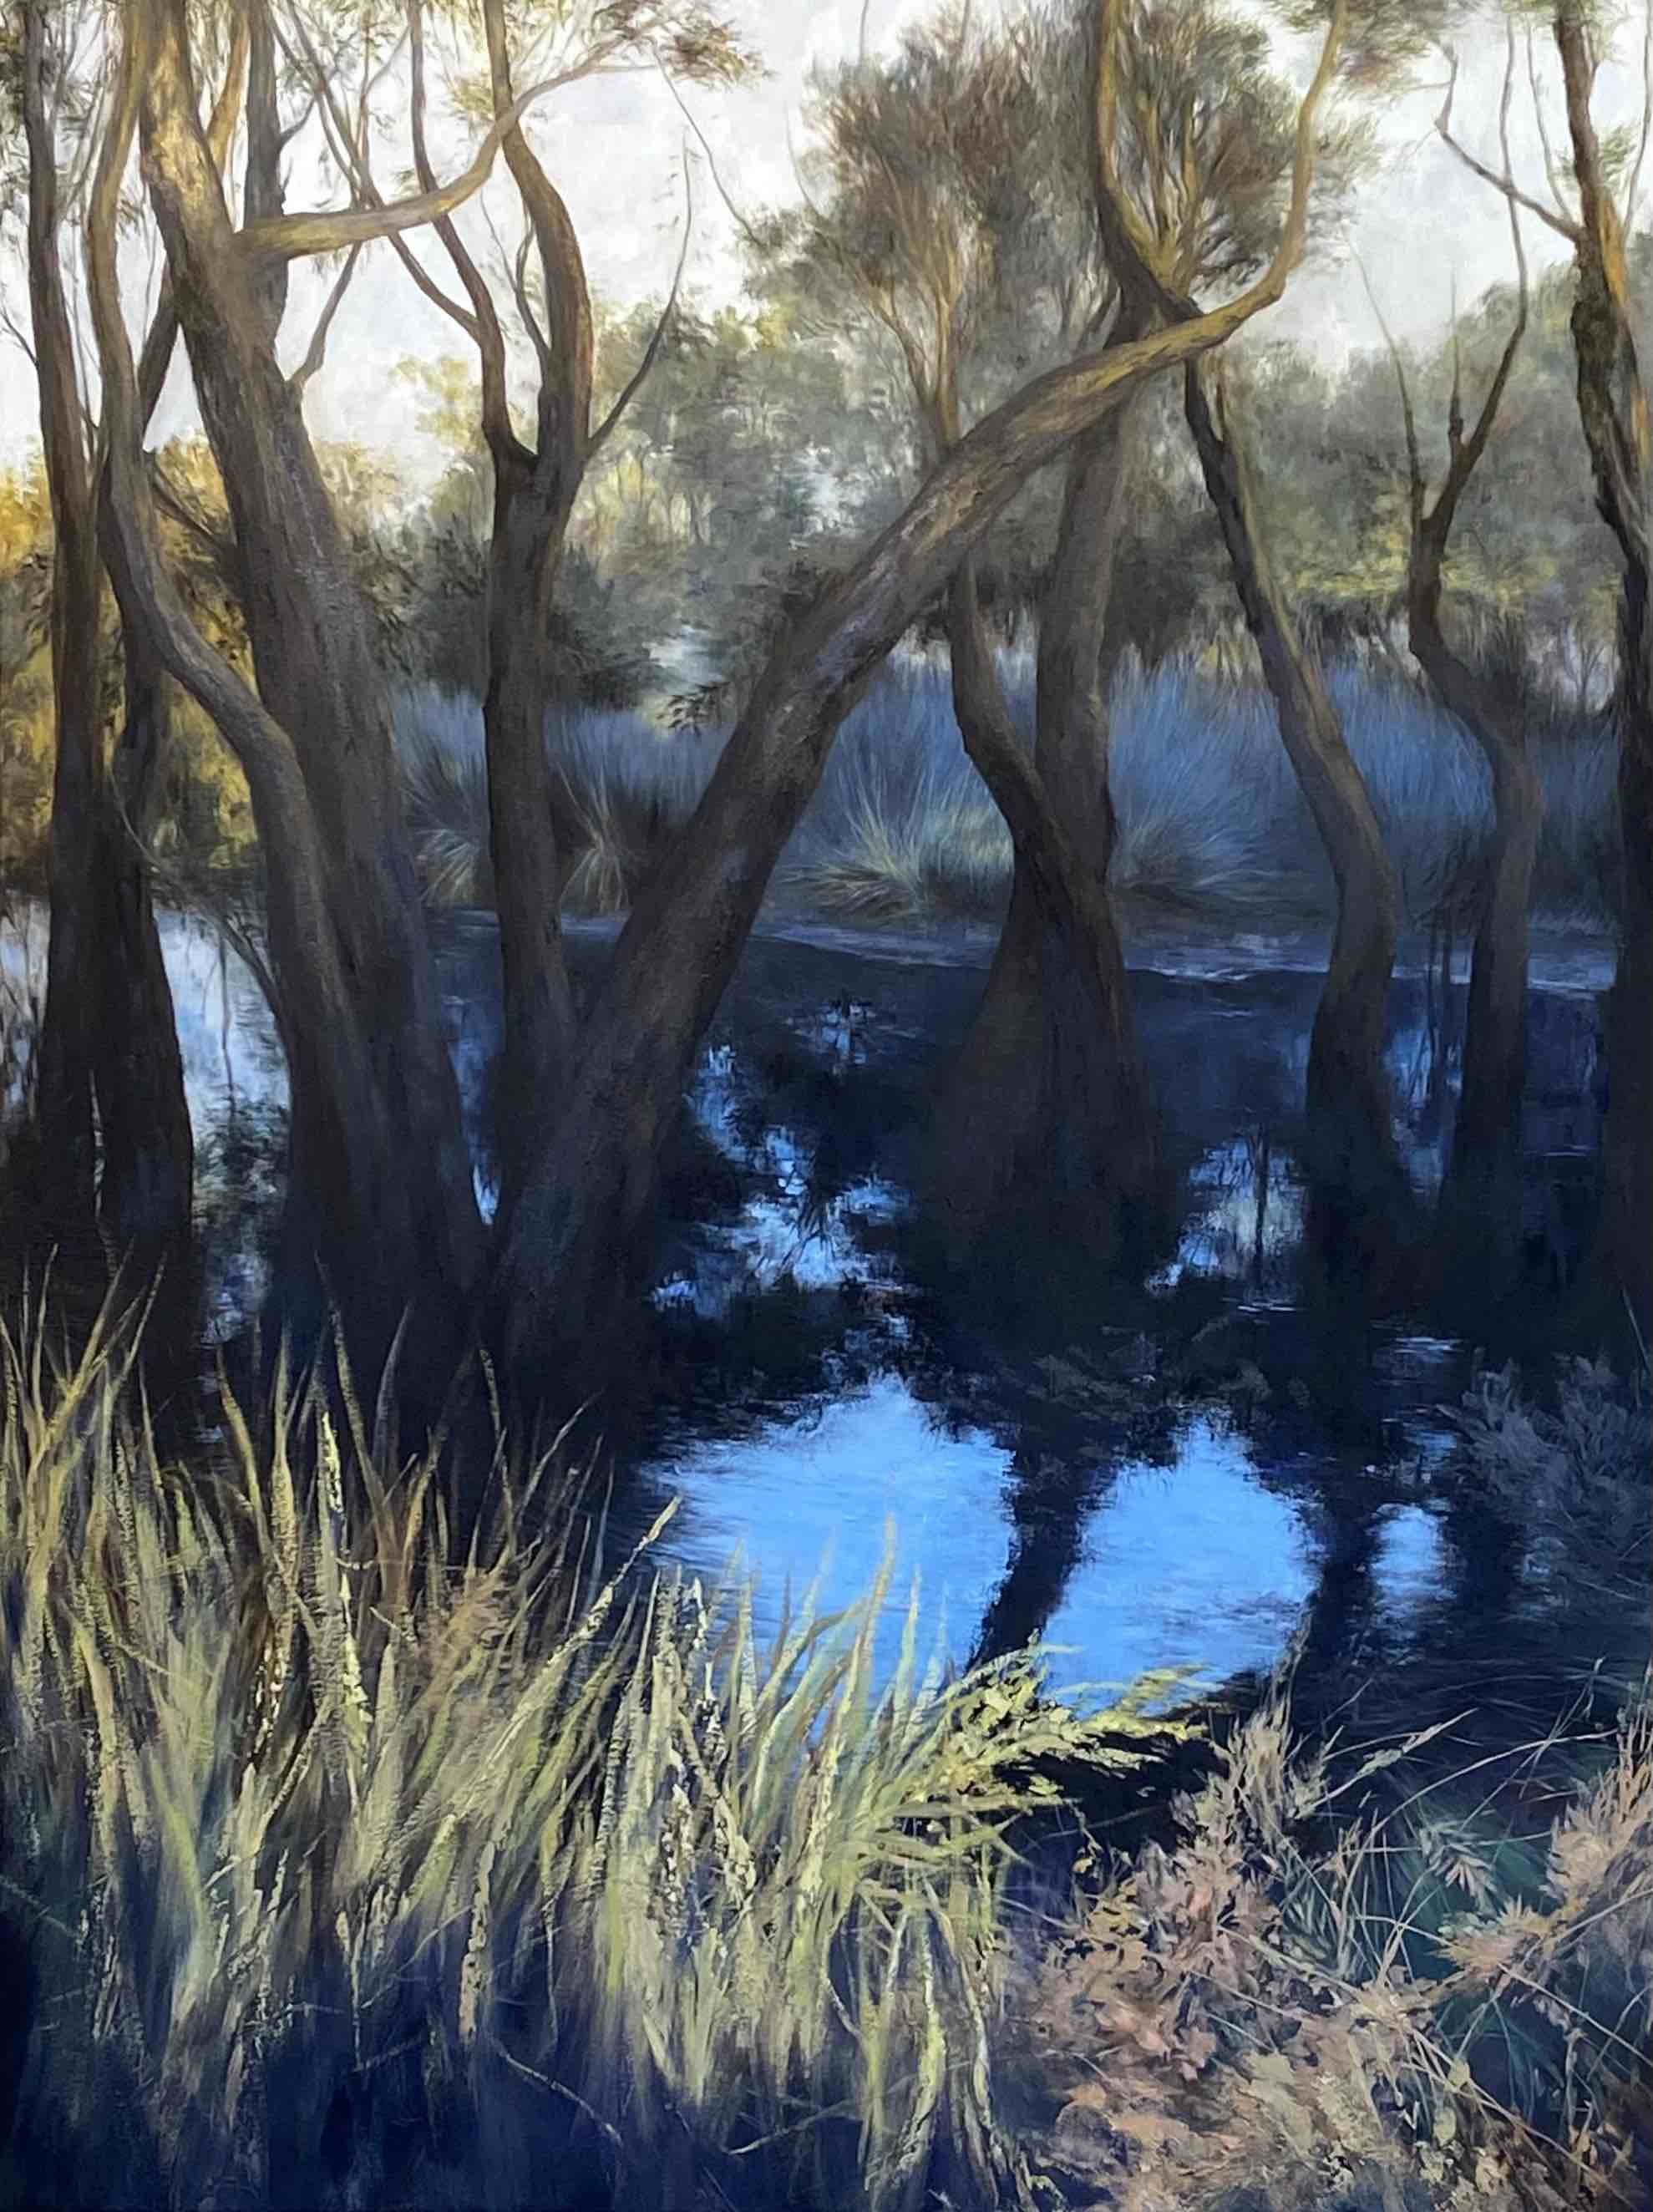 Dryads of the Lagoon, Oil on Canvas, 100 x 75cm, Sold